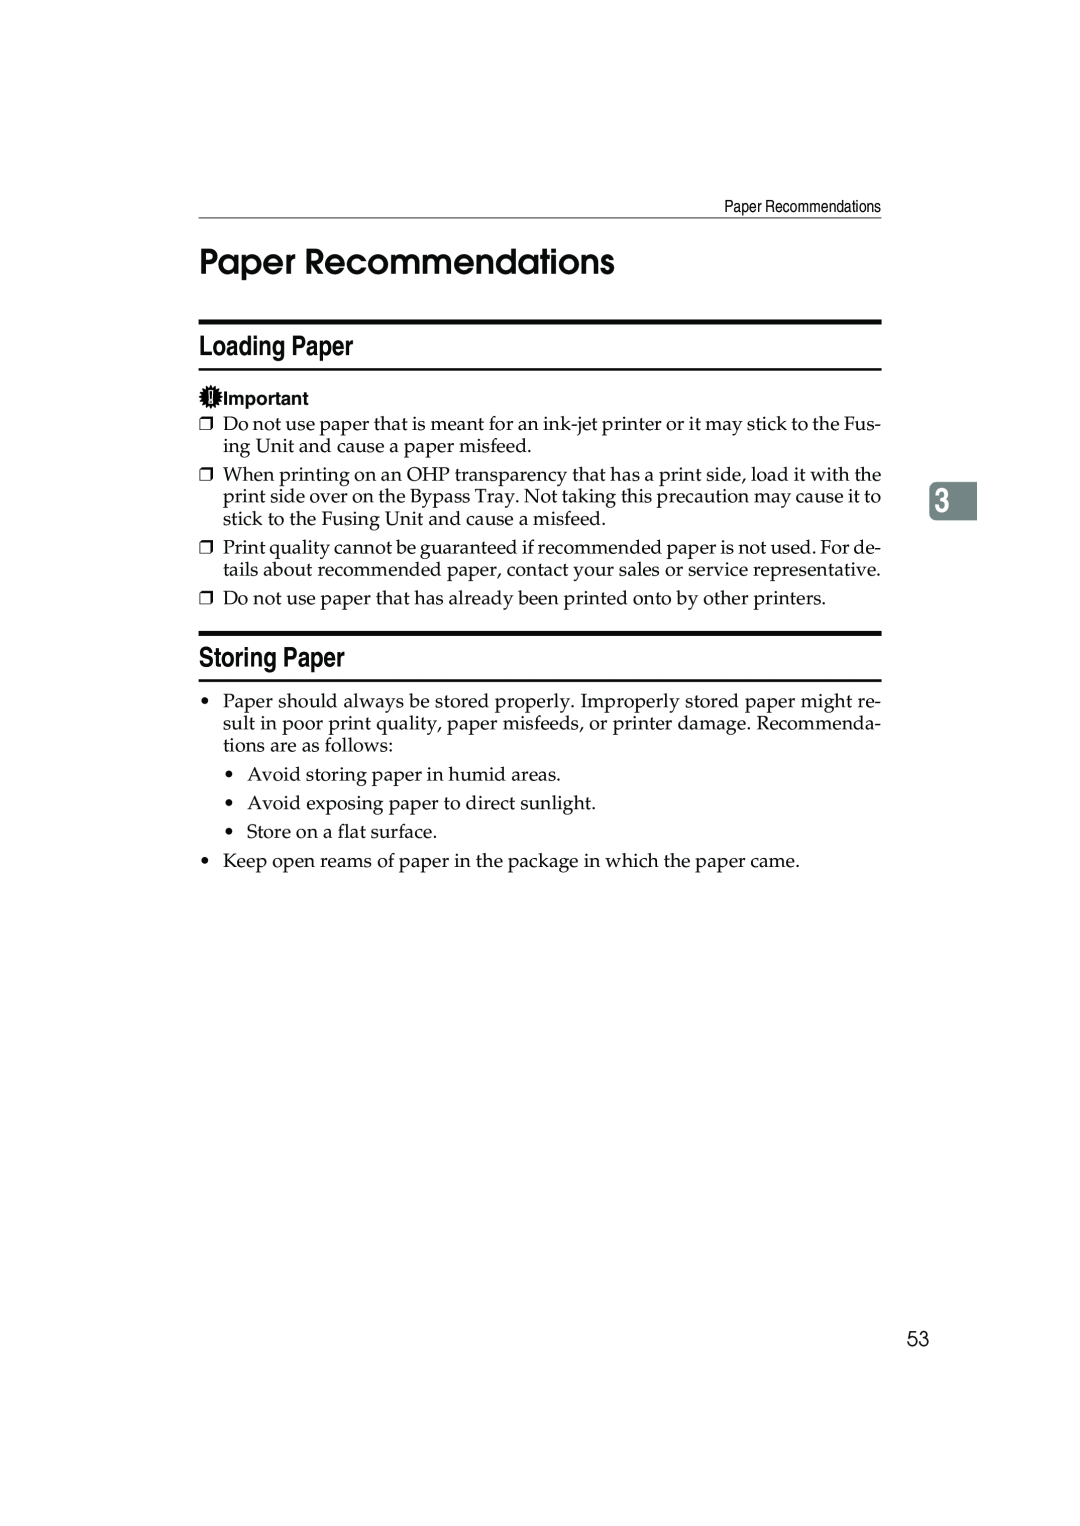 Ricoh AP3800C operating instructions Paper Recommendations, Loading Paper, Storing Paper 